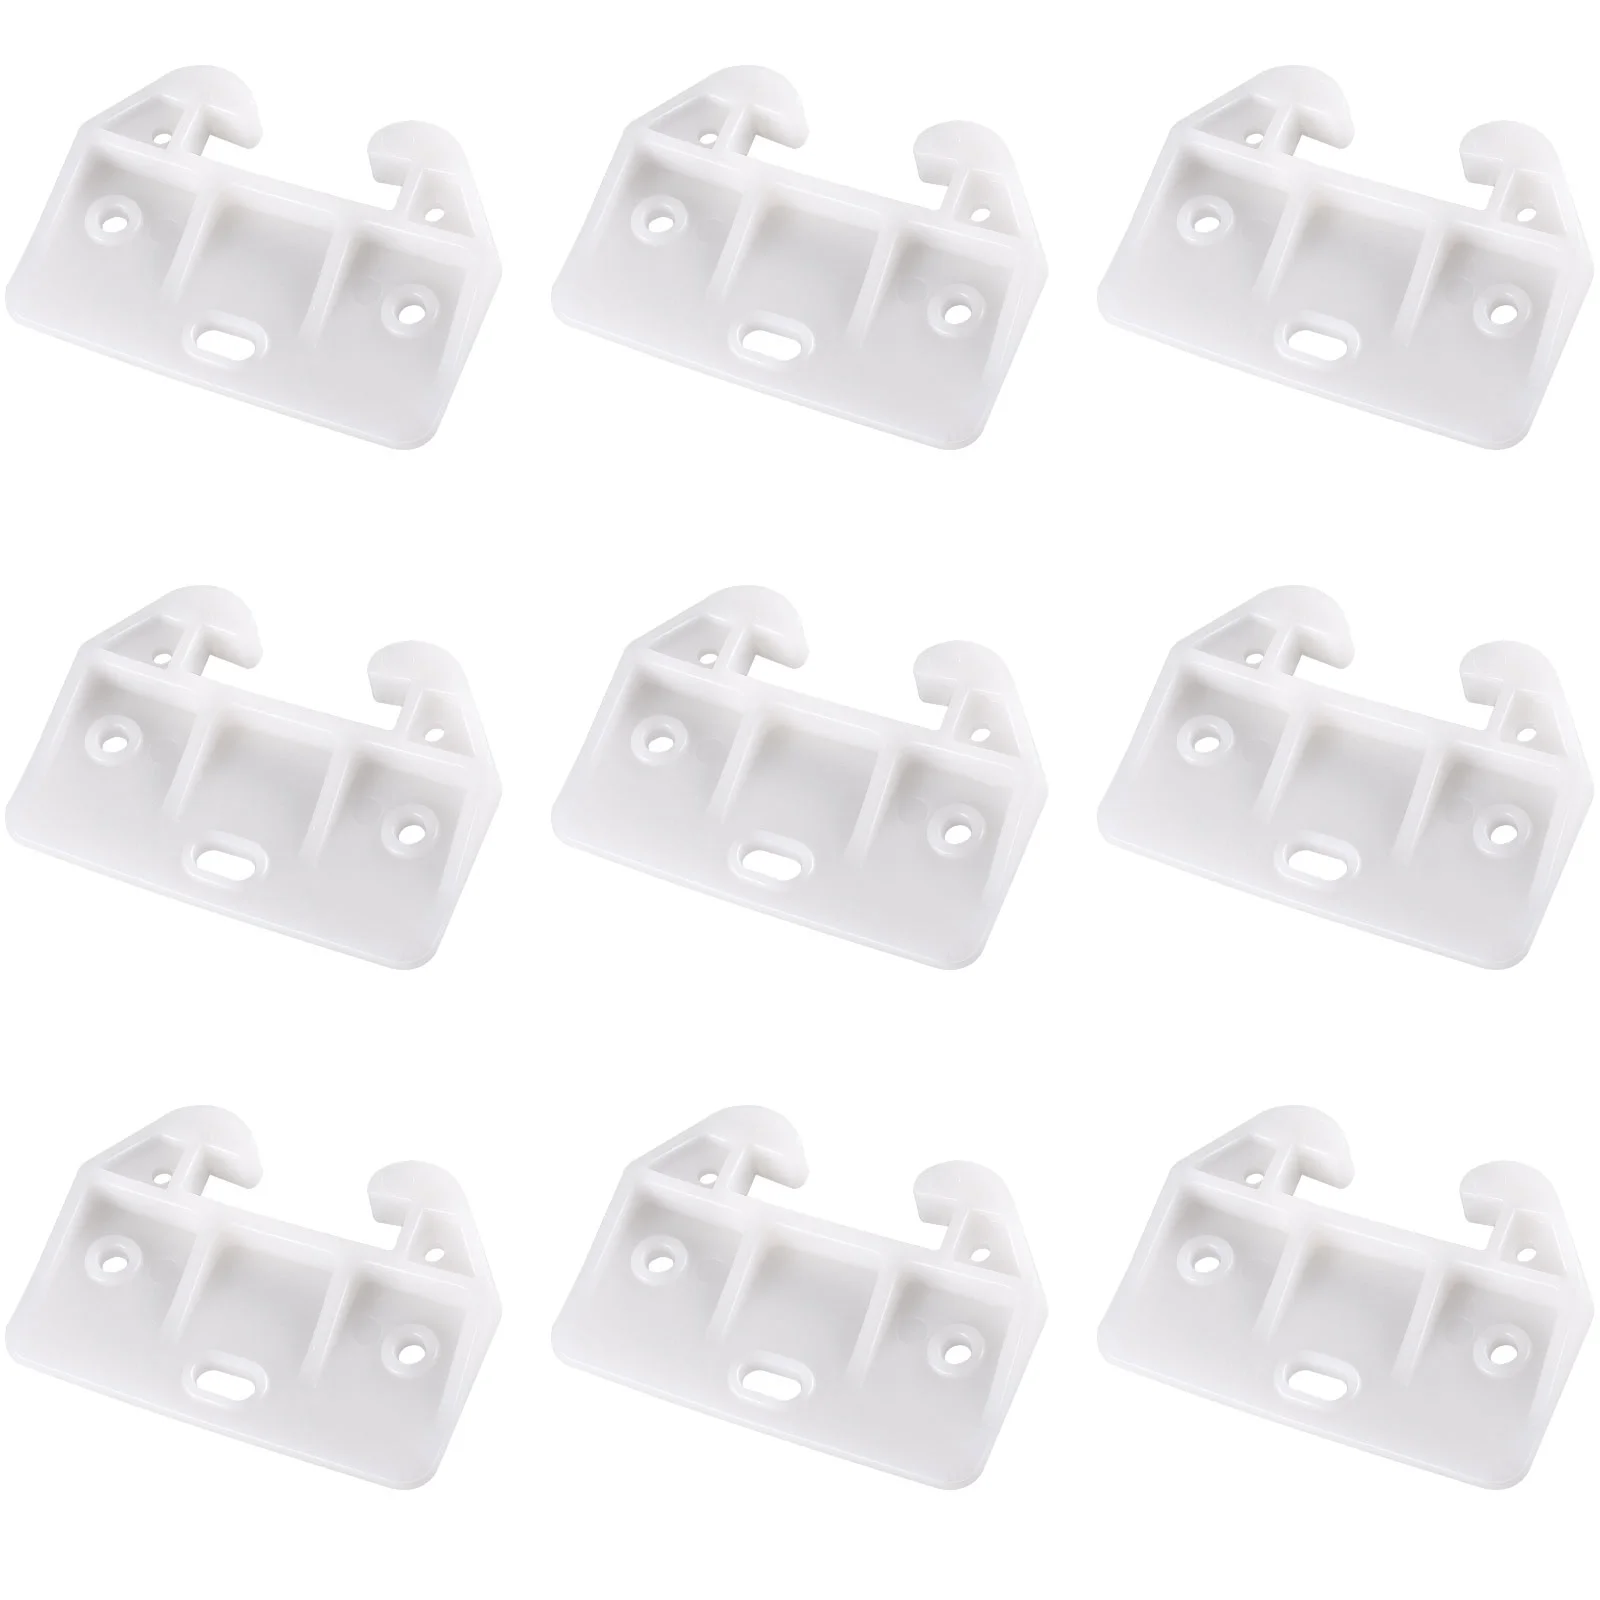 

10 Pcs Scroll Wheel Replacement Drawer Guides Plastic Hooks Table Cupboard Rail Dresser Wardrobe Track Drawers